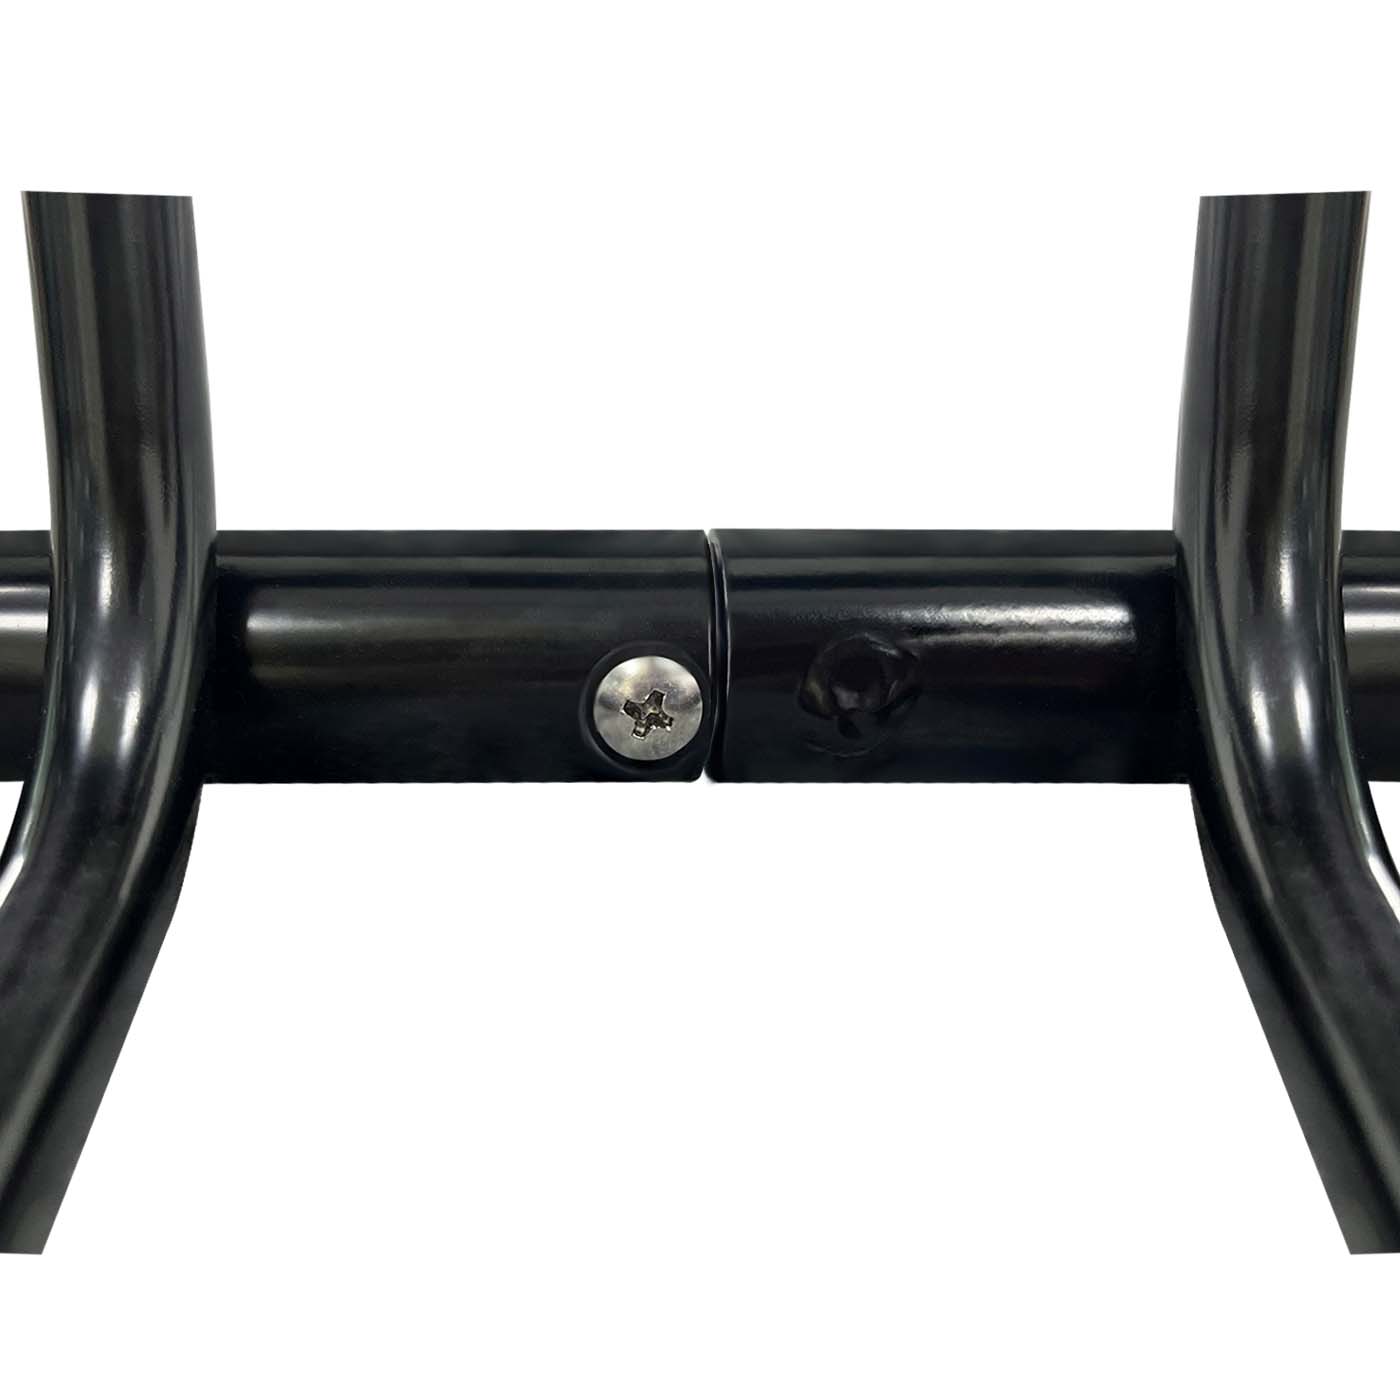 OPENROAD Roof Rack, assembled version  openroad4wd.com   